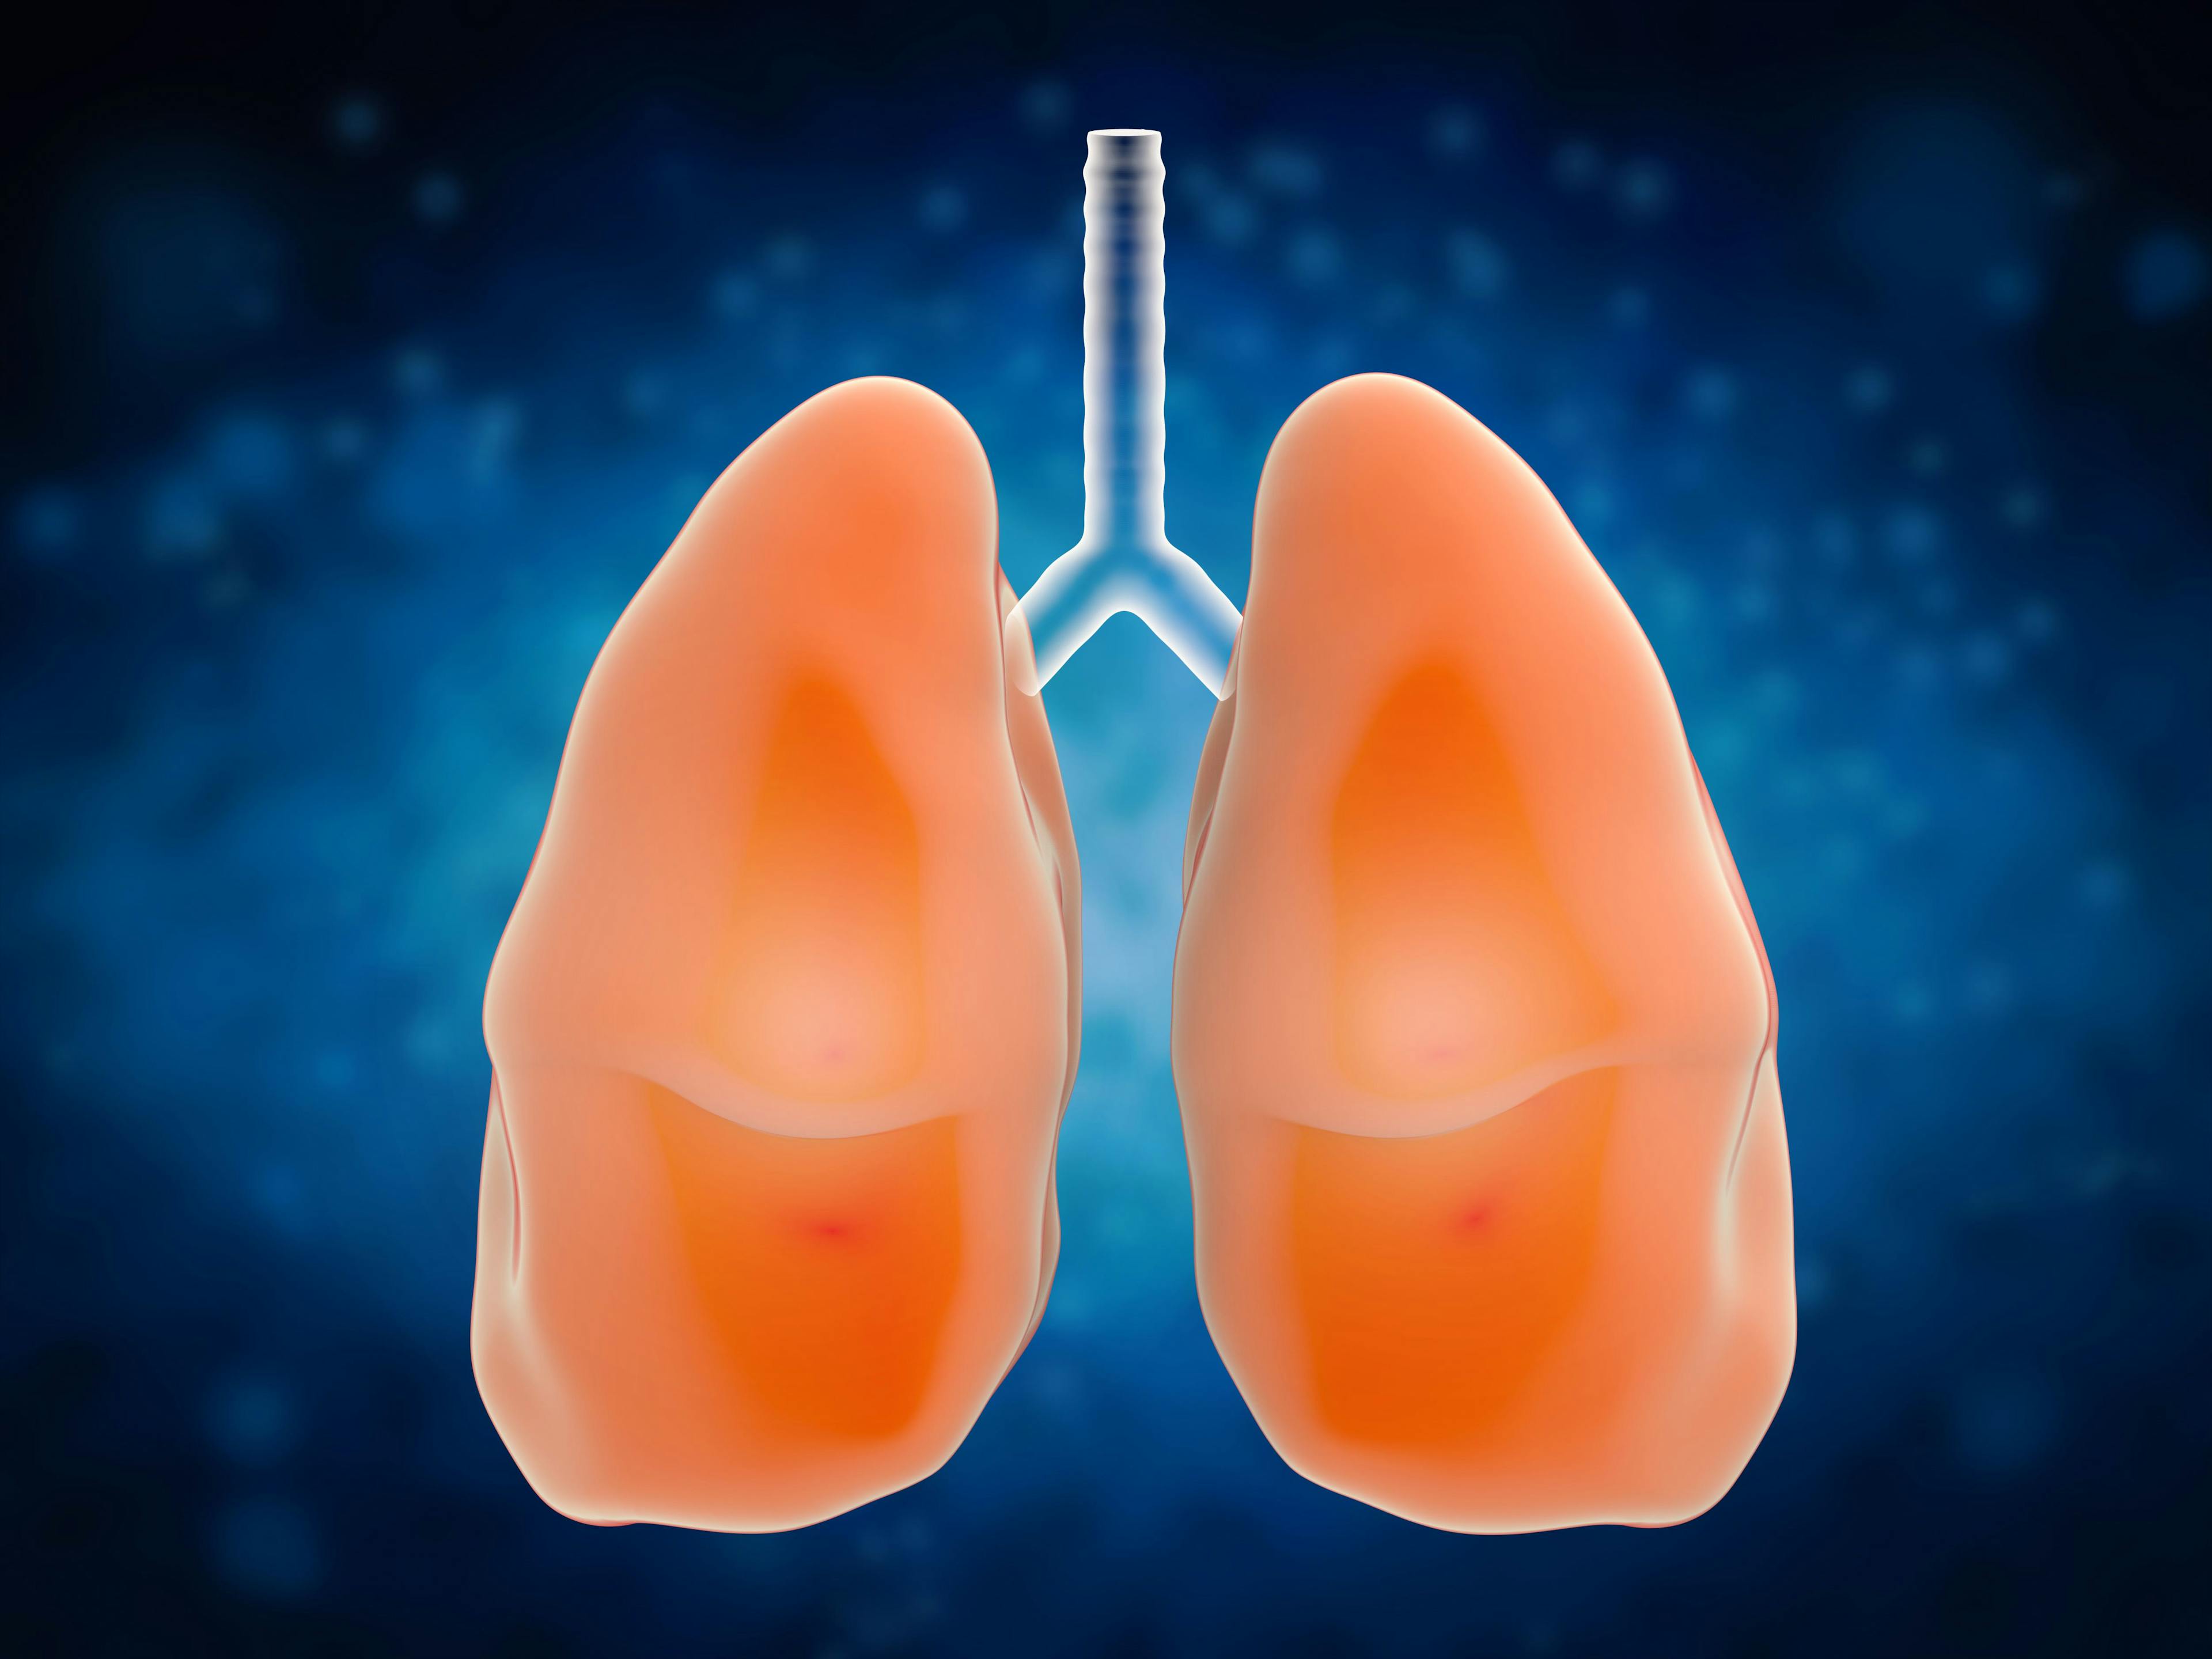 Investigators will present overall survival and objective response data from the phase 3 MARIPOSA trial assessing amivantamab in EGFR exon 19 deletion–positive non–small cell lung cancer at a future scientific meeting.